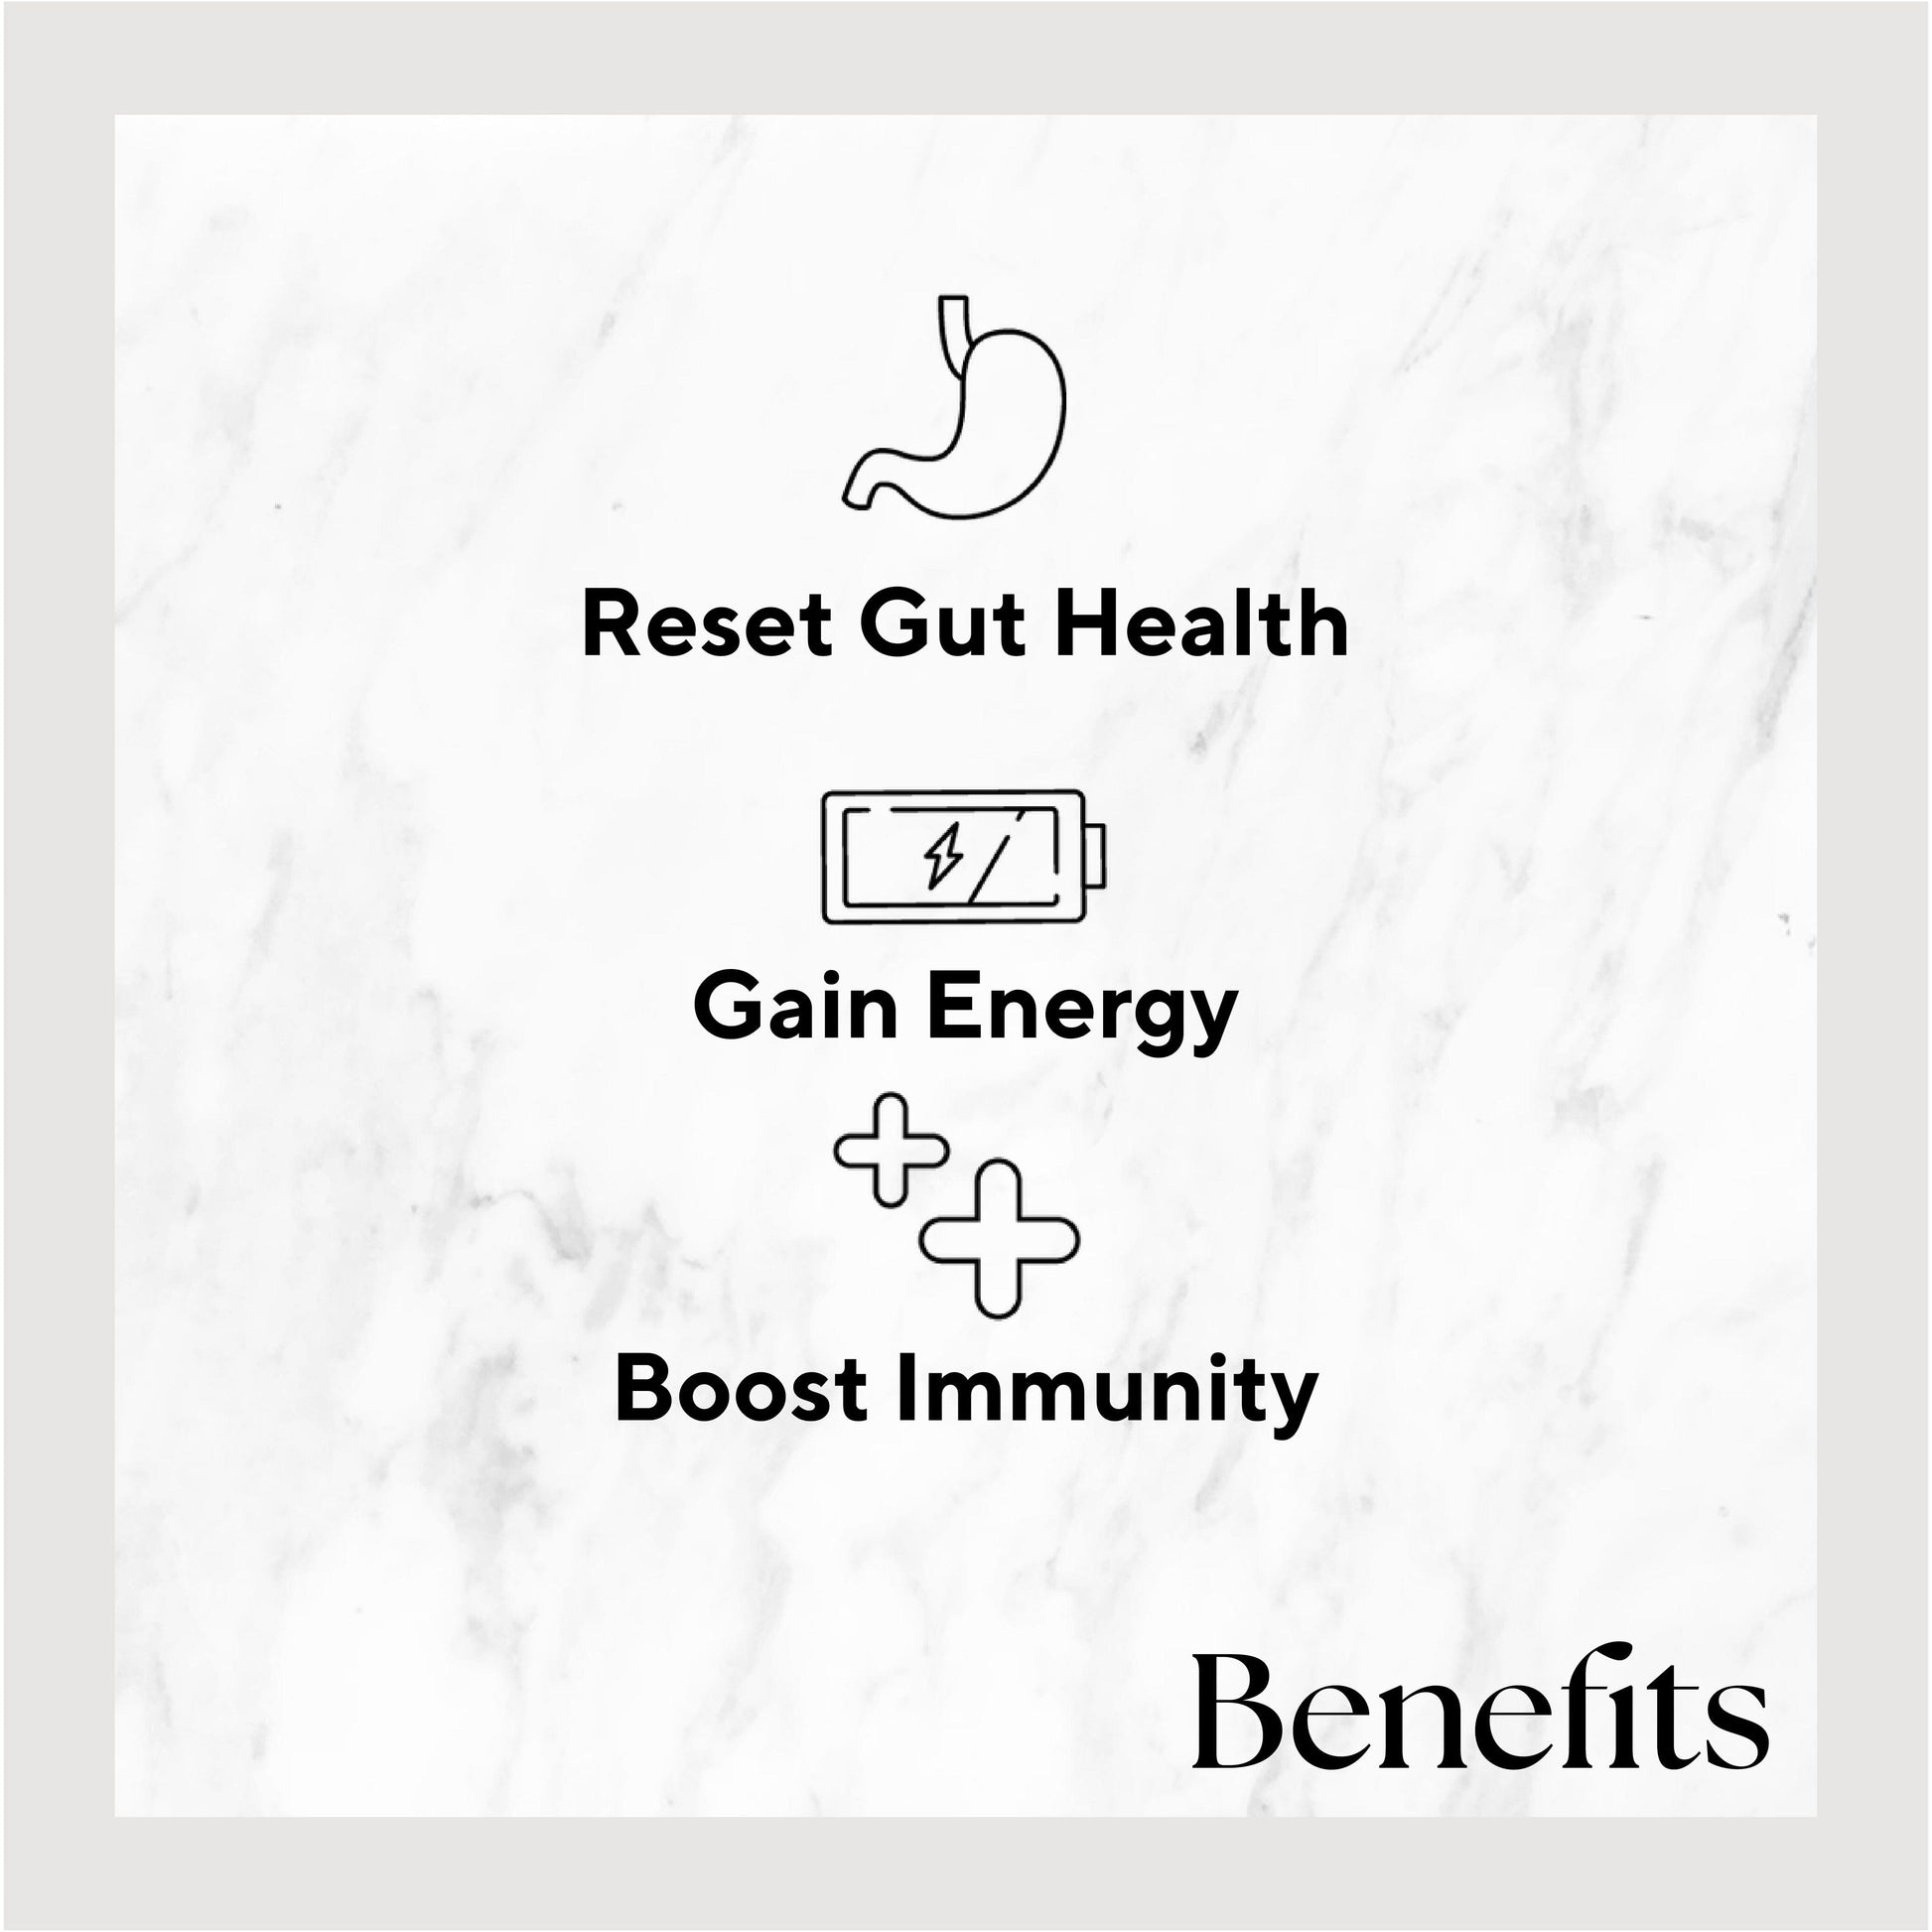 Infographic listing benefits of the product. Benefits include: Reset Gut Health, Gain Energy, and Boost Immunity.